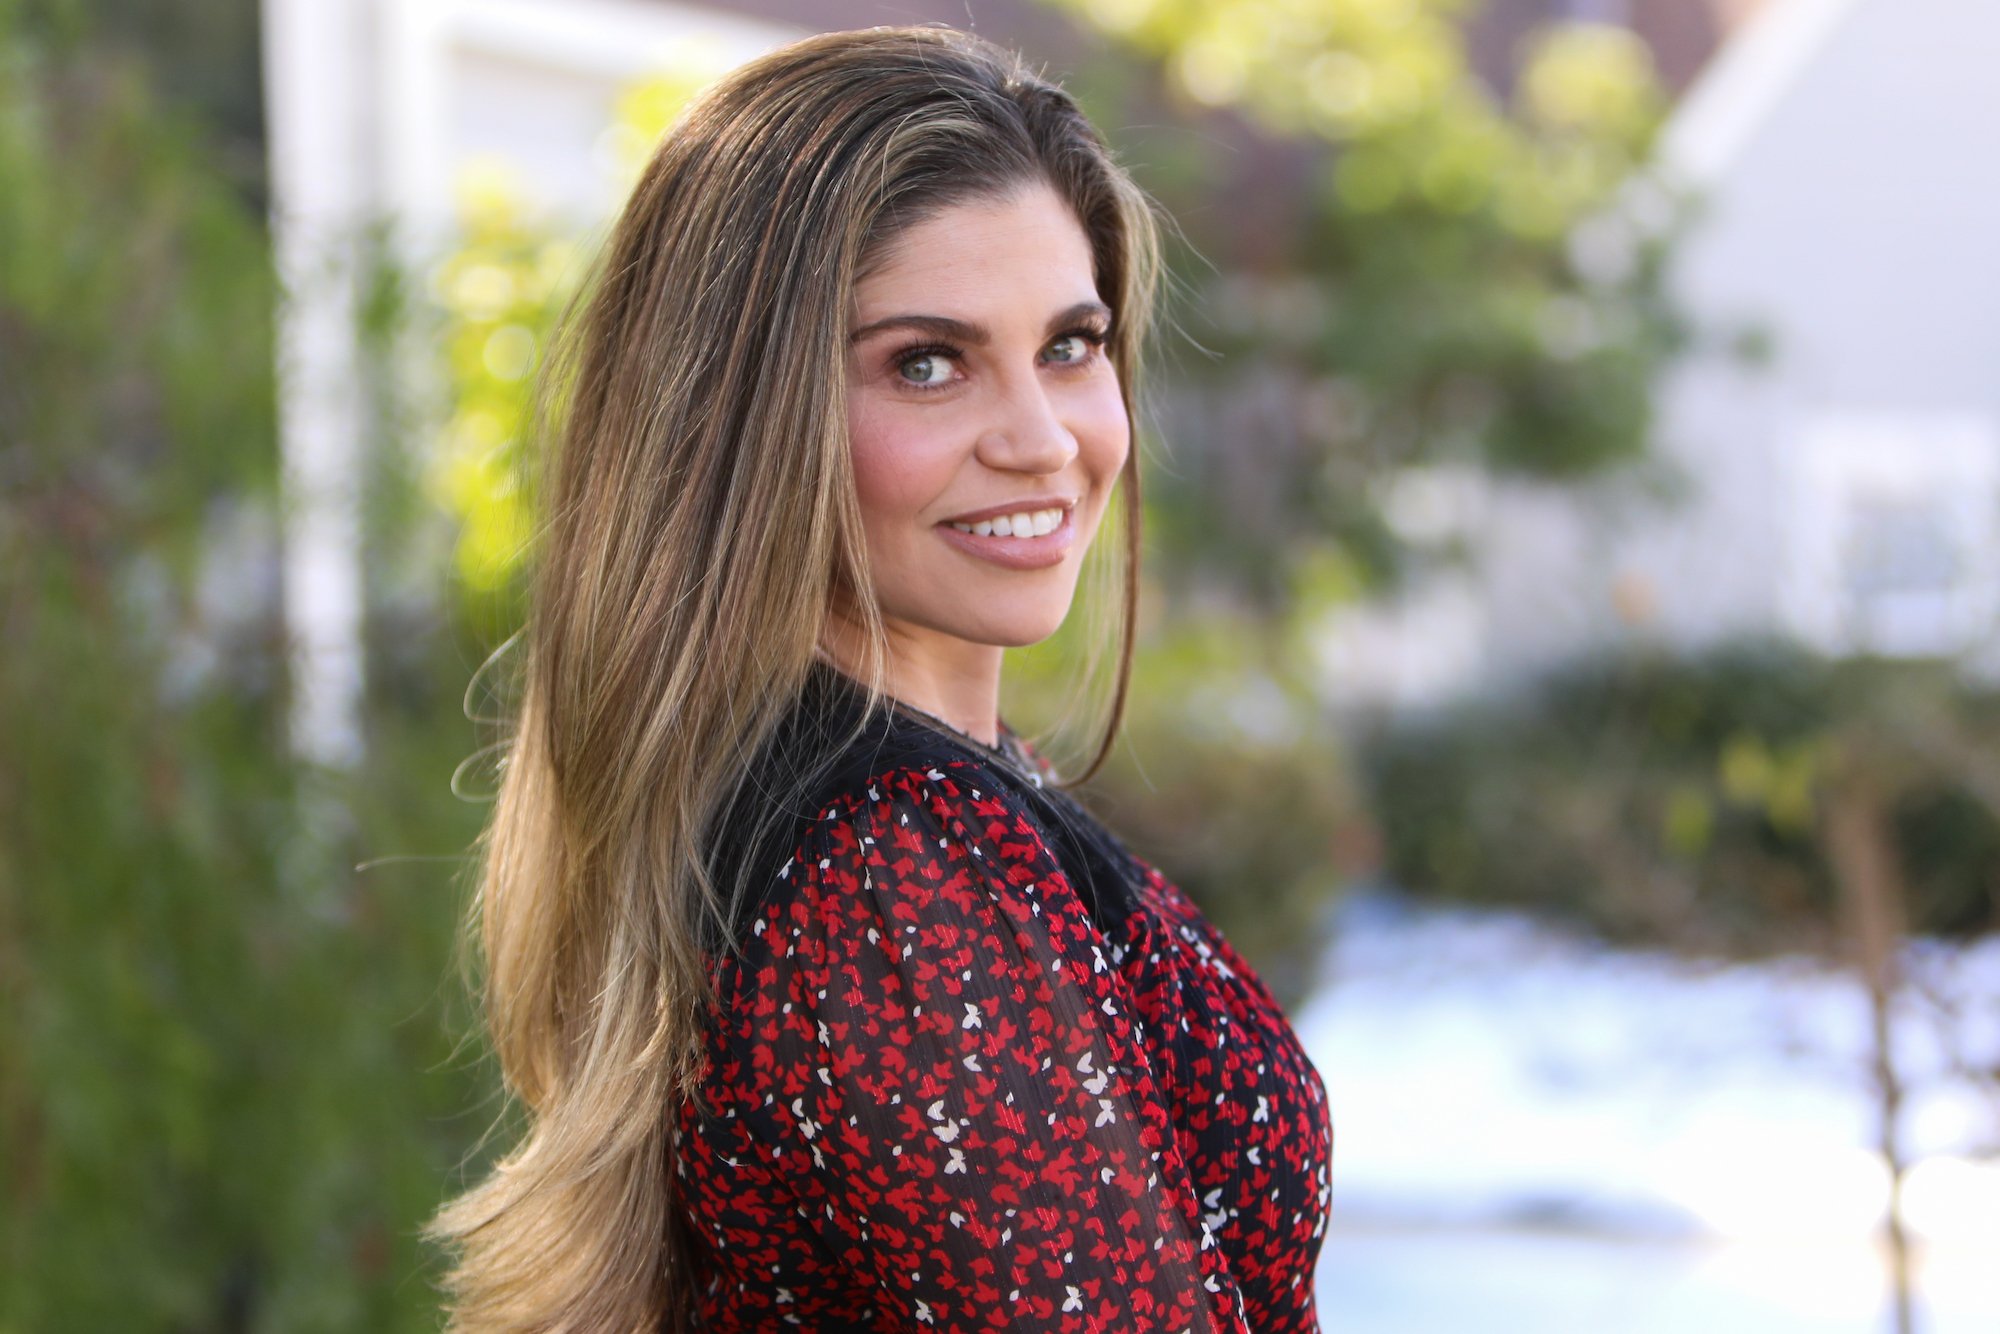 'Boy Meets World' Actress Danielle Fishel visits Hallmark Channel's "Home & Family" at Universal Studios Hollywood 